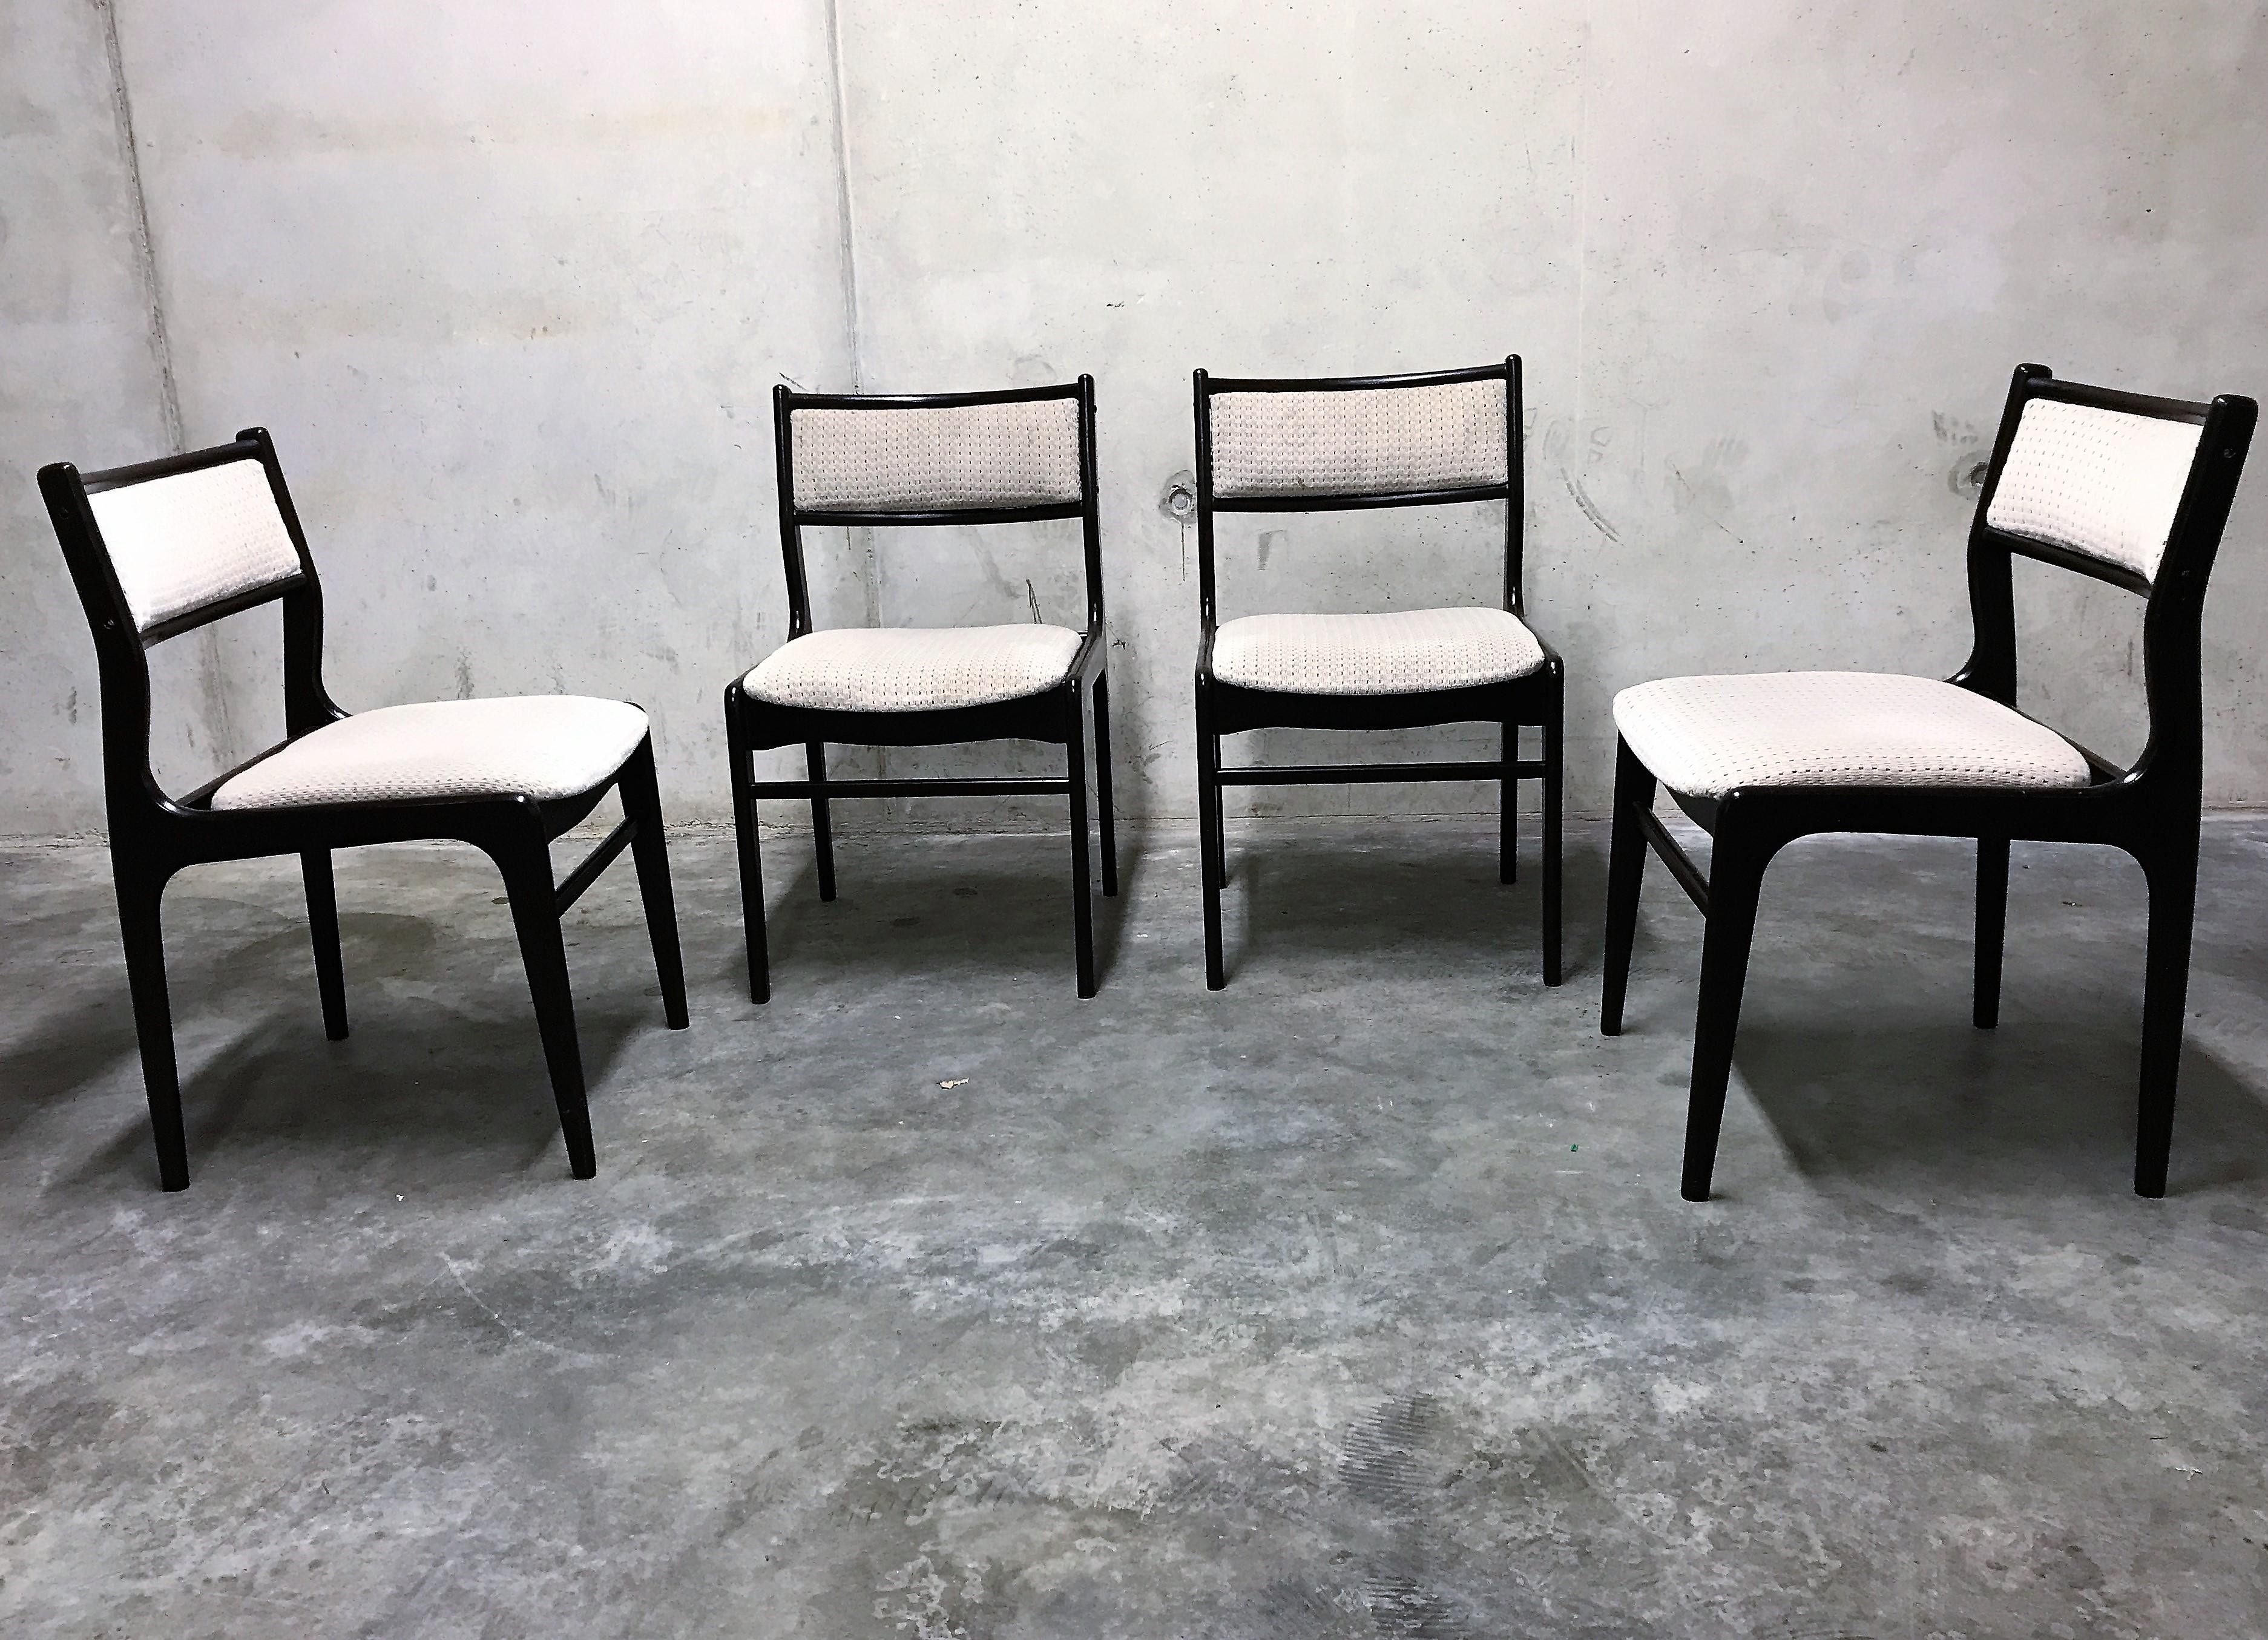 Set of 4 Mid-Century Modern scandinavian designed dining chairs.

The chairs are made of a very dark brown teak wooden frame ophulsotered with grey fabric.

The upholstery will be renewed to the same grey so that it looks spotless.

These